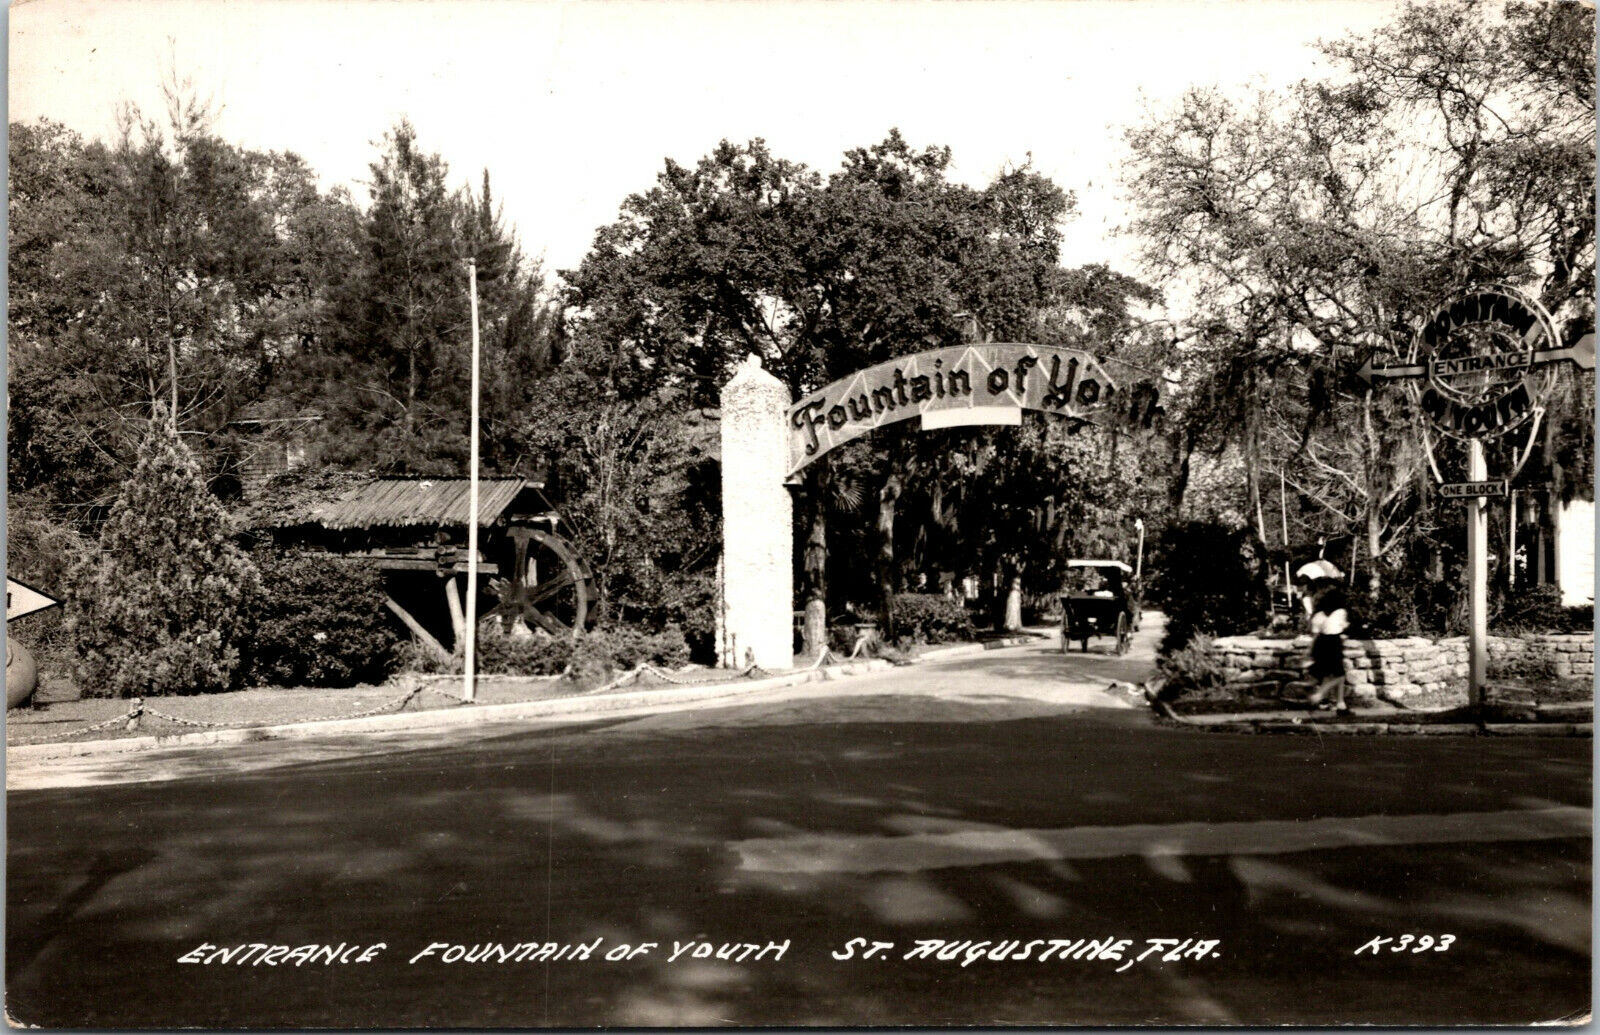 Vtg 1930s Entrance Fountain Of Youth St Augustine Florida FL RPPC Postcard